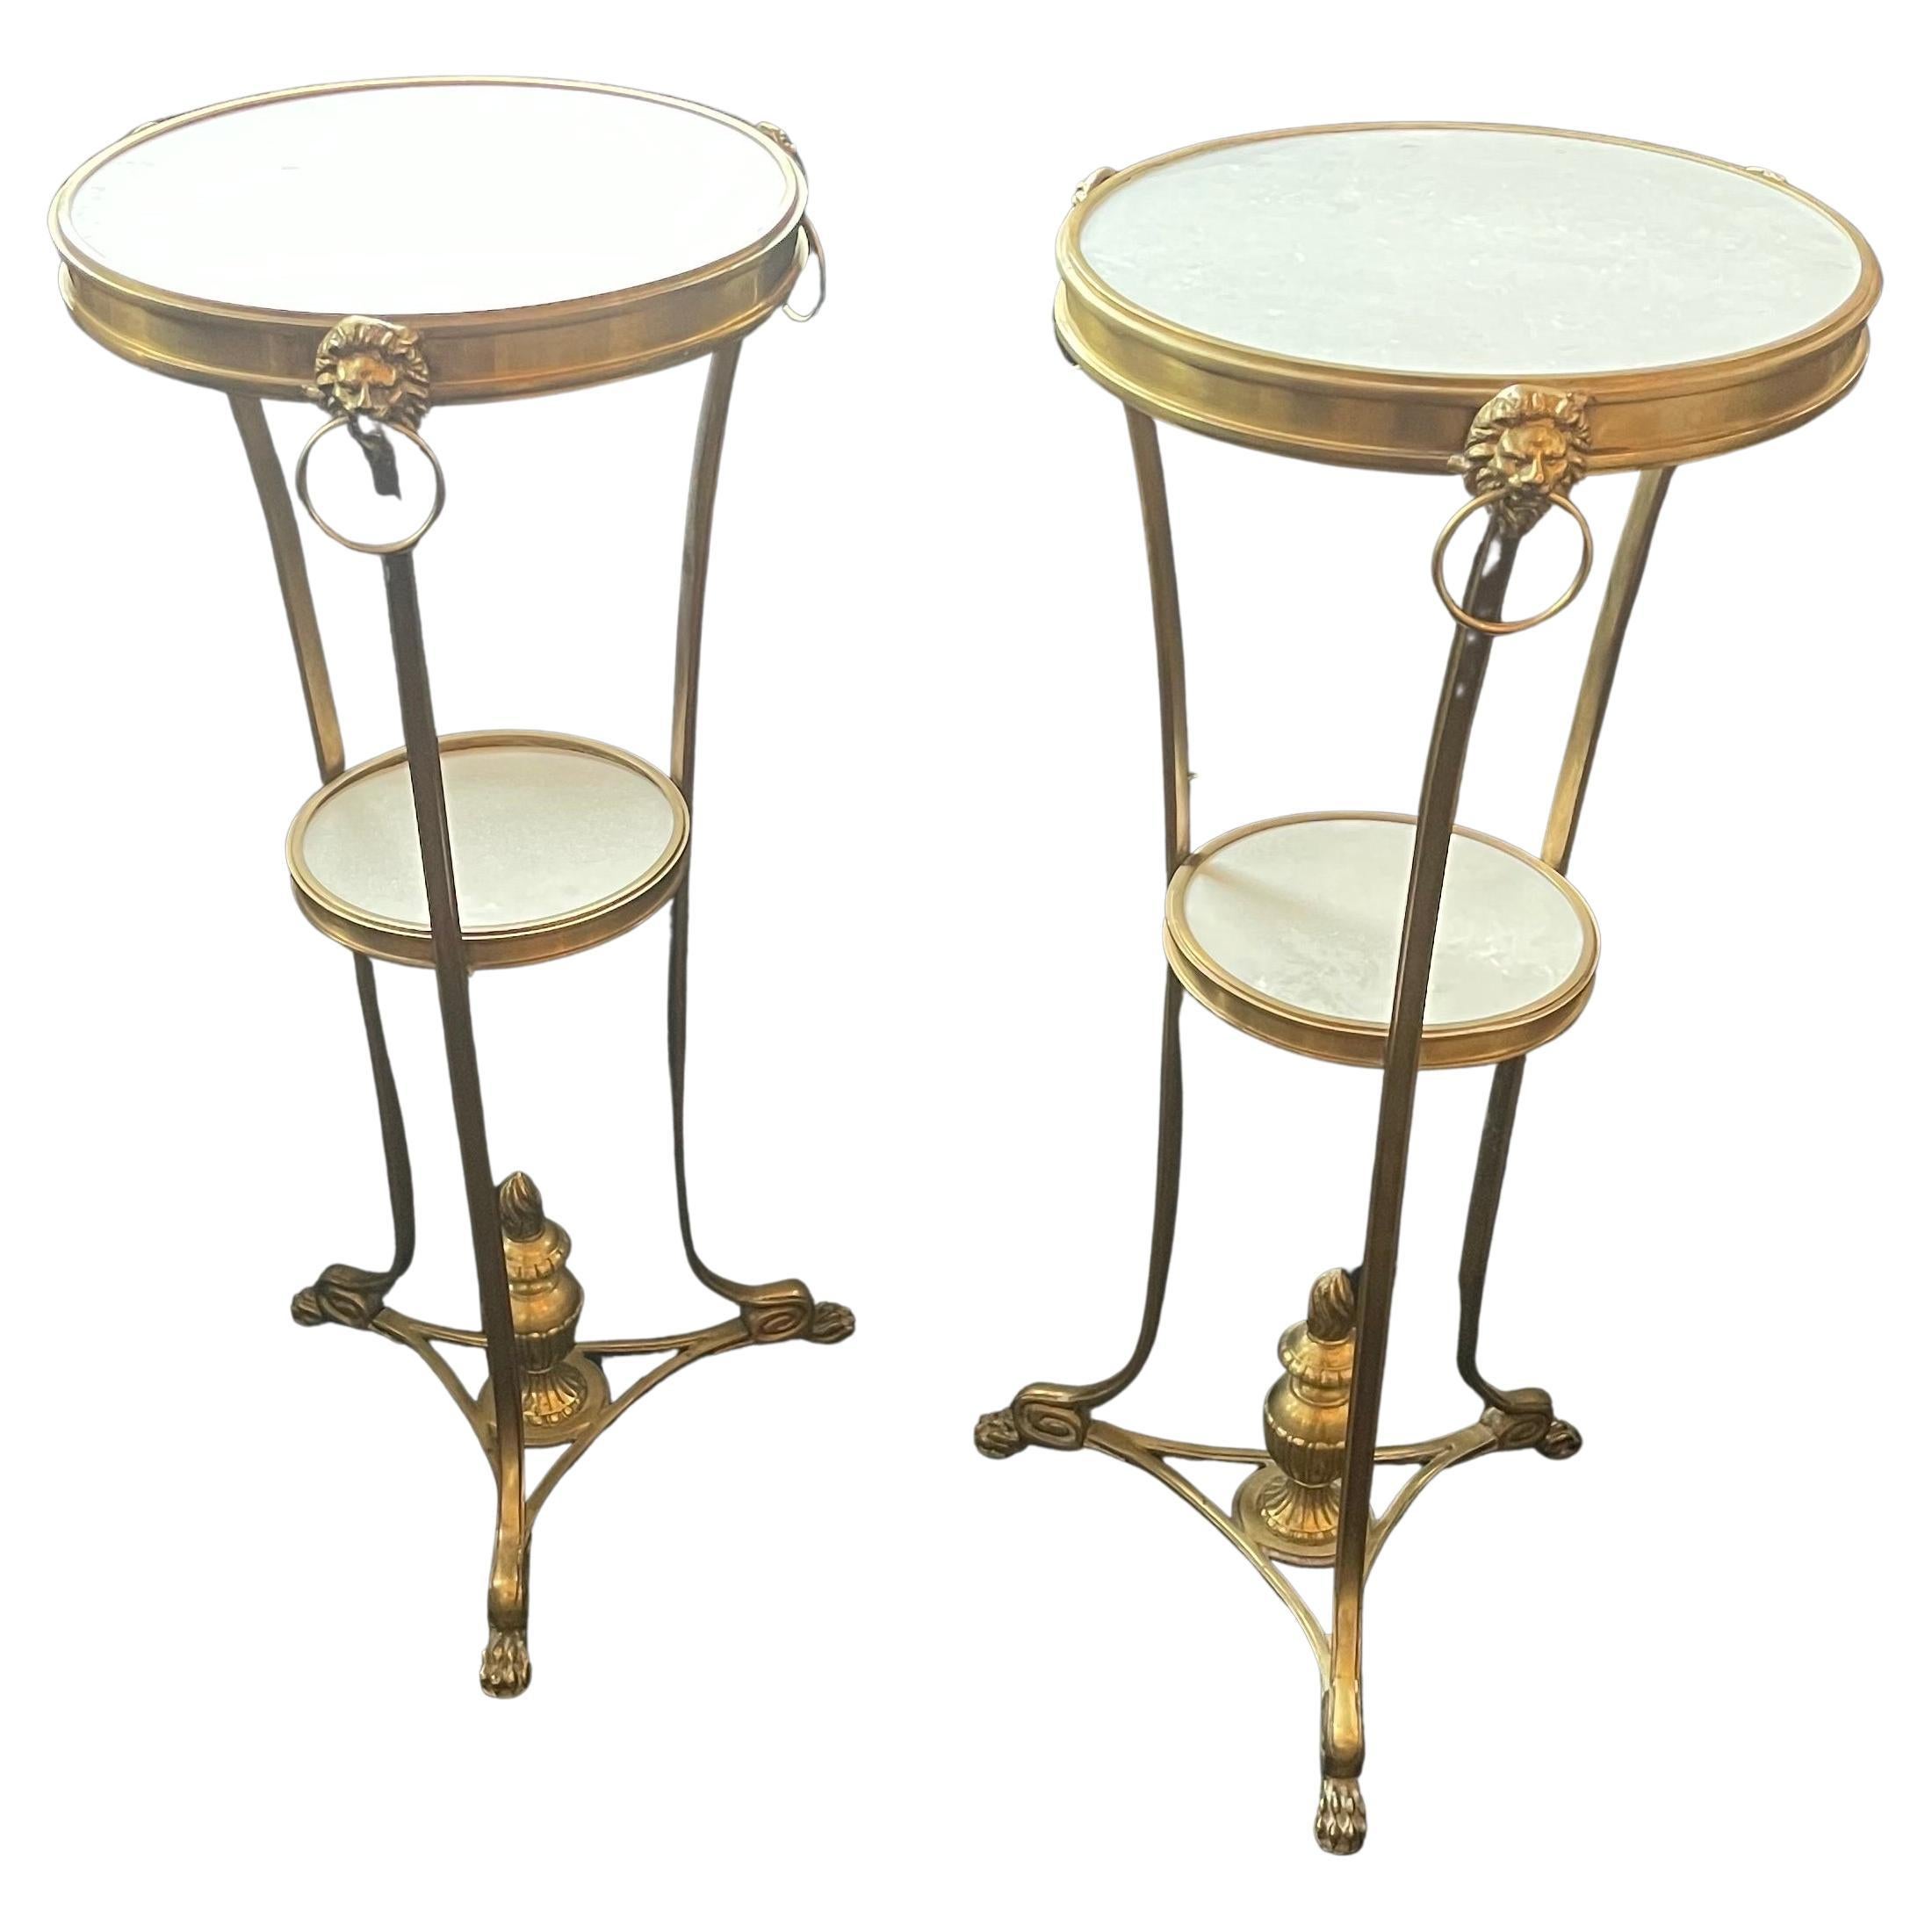 A wonderful pair of Empire, Regency, Neoclassical Ormolu bronze lions head and paw feet with white marble inset top two tier gueridon side tables.